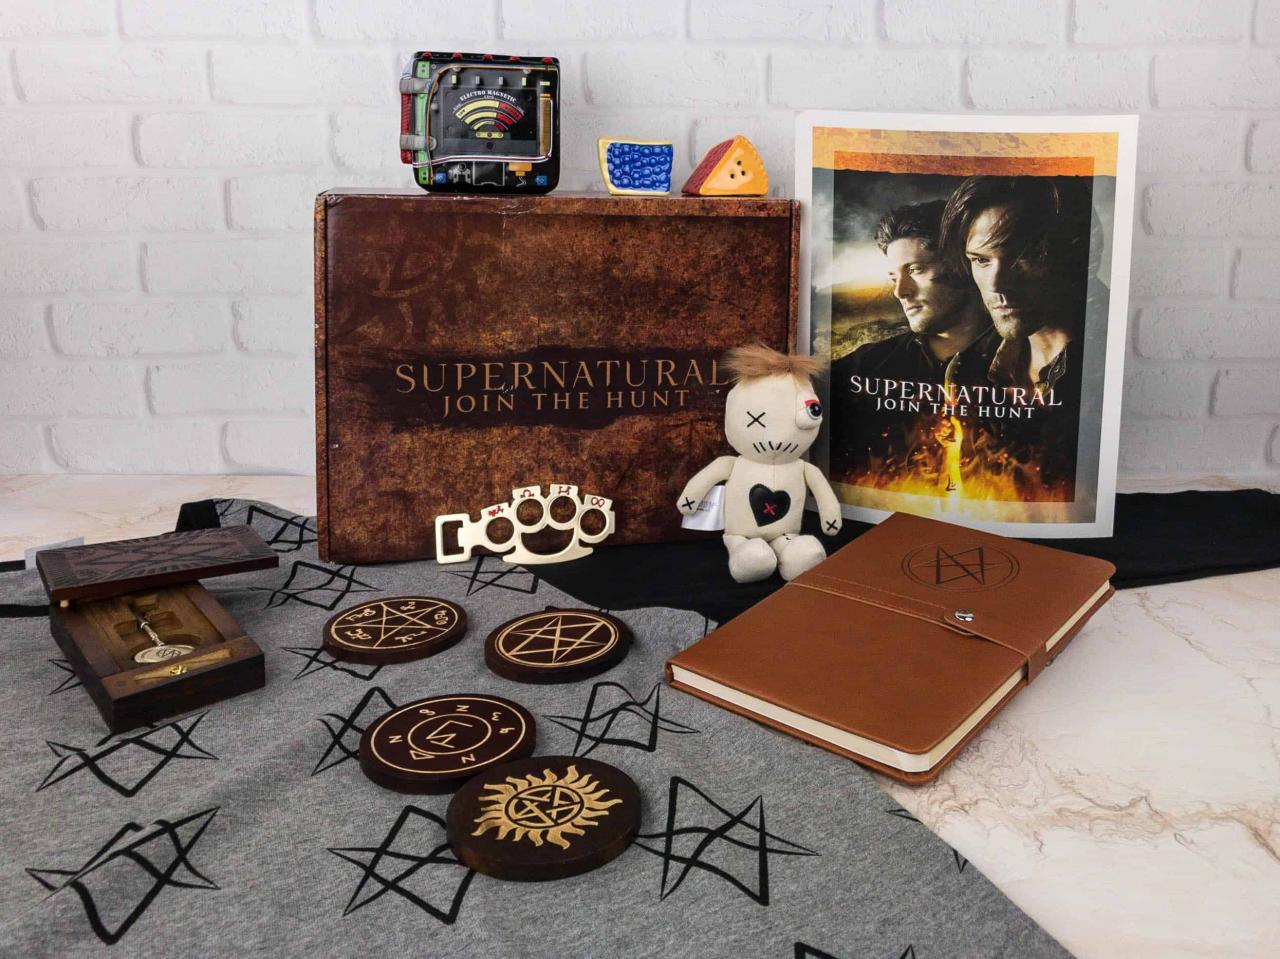 Supernatural Box Reviews Get All The Details At Hello Subscription!